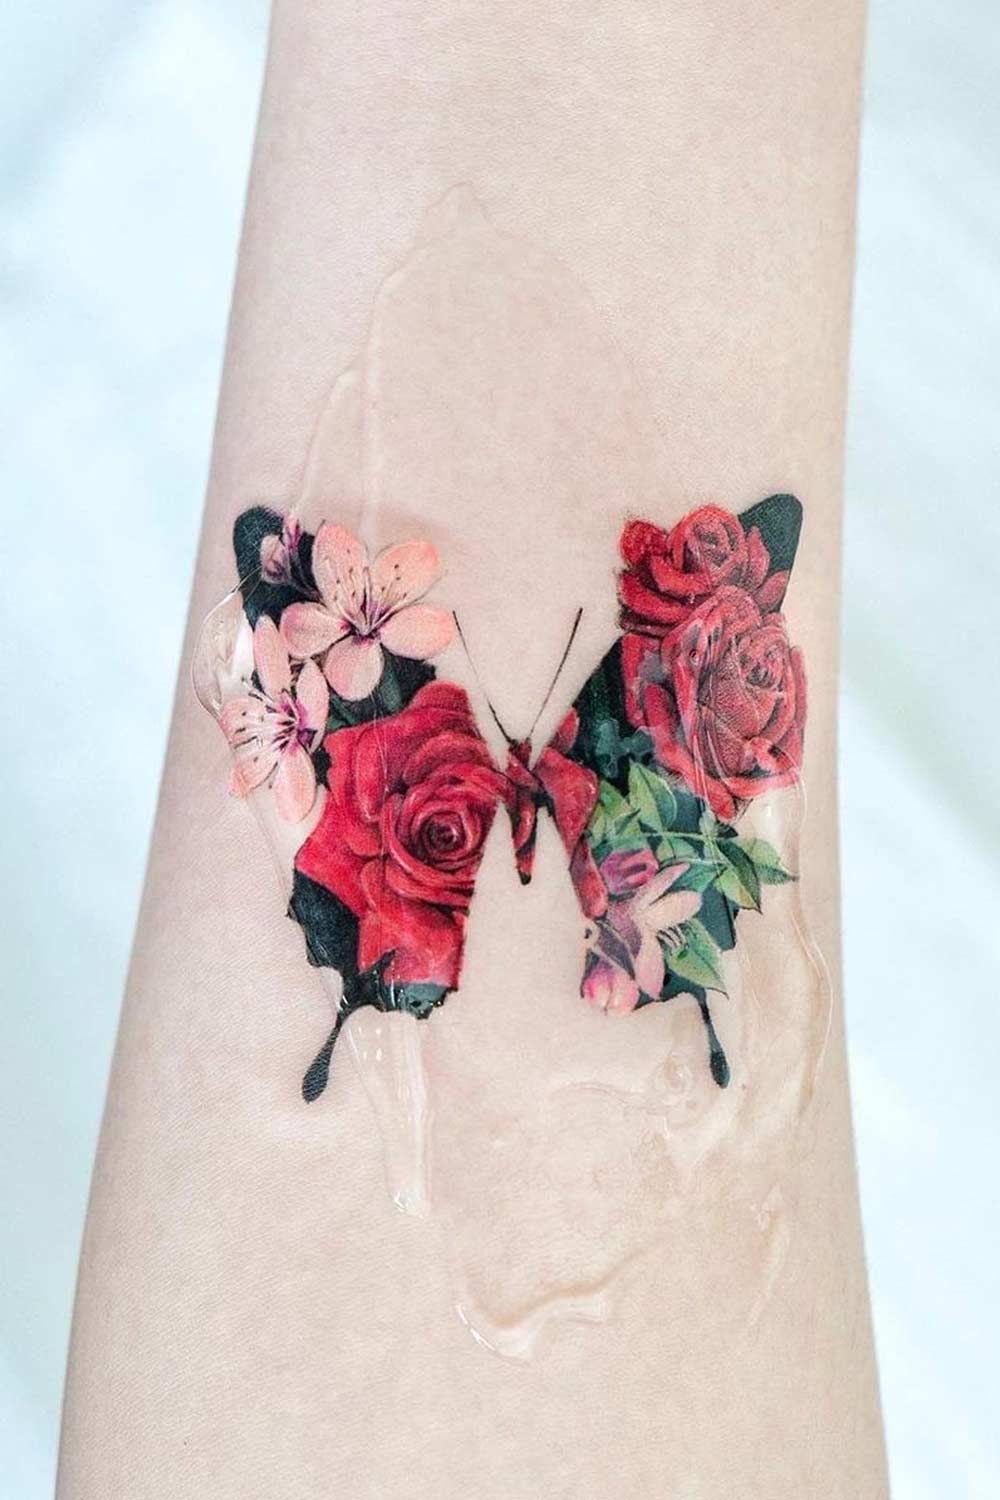 Black Butterfly Tattoo with Flowers Inside